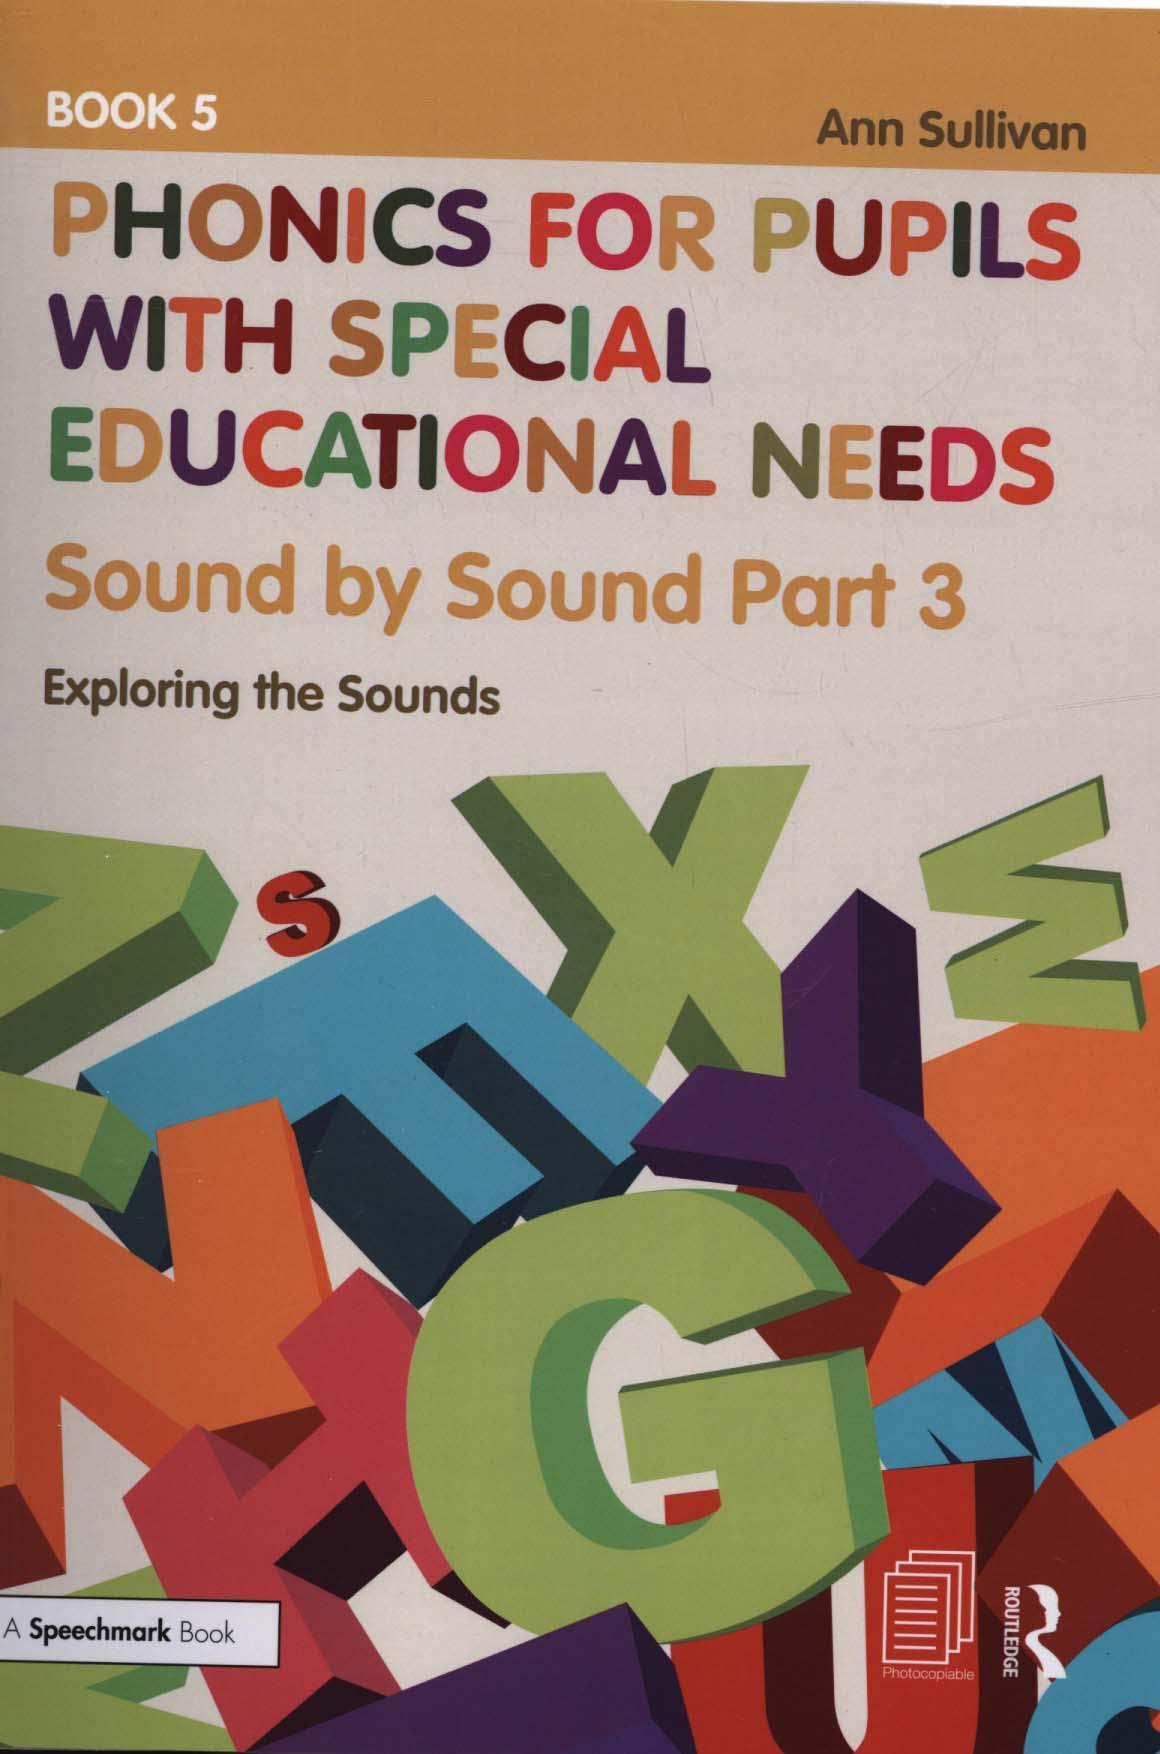 Phonics for Pupils with Special Educational Needs Book 5: So